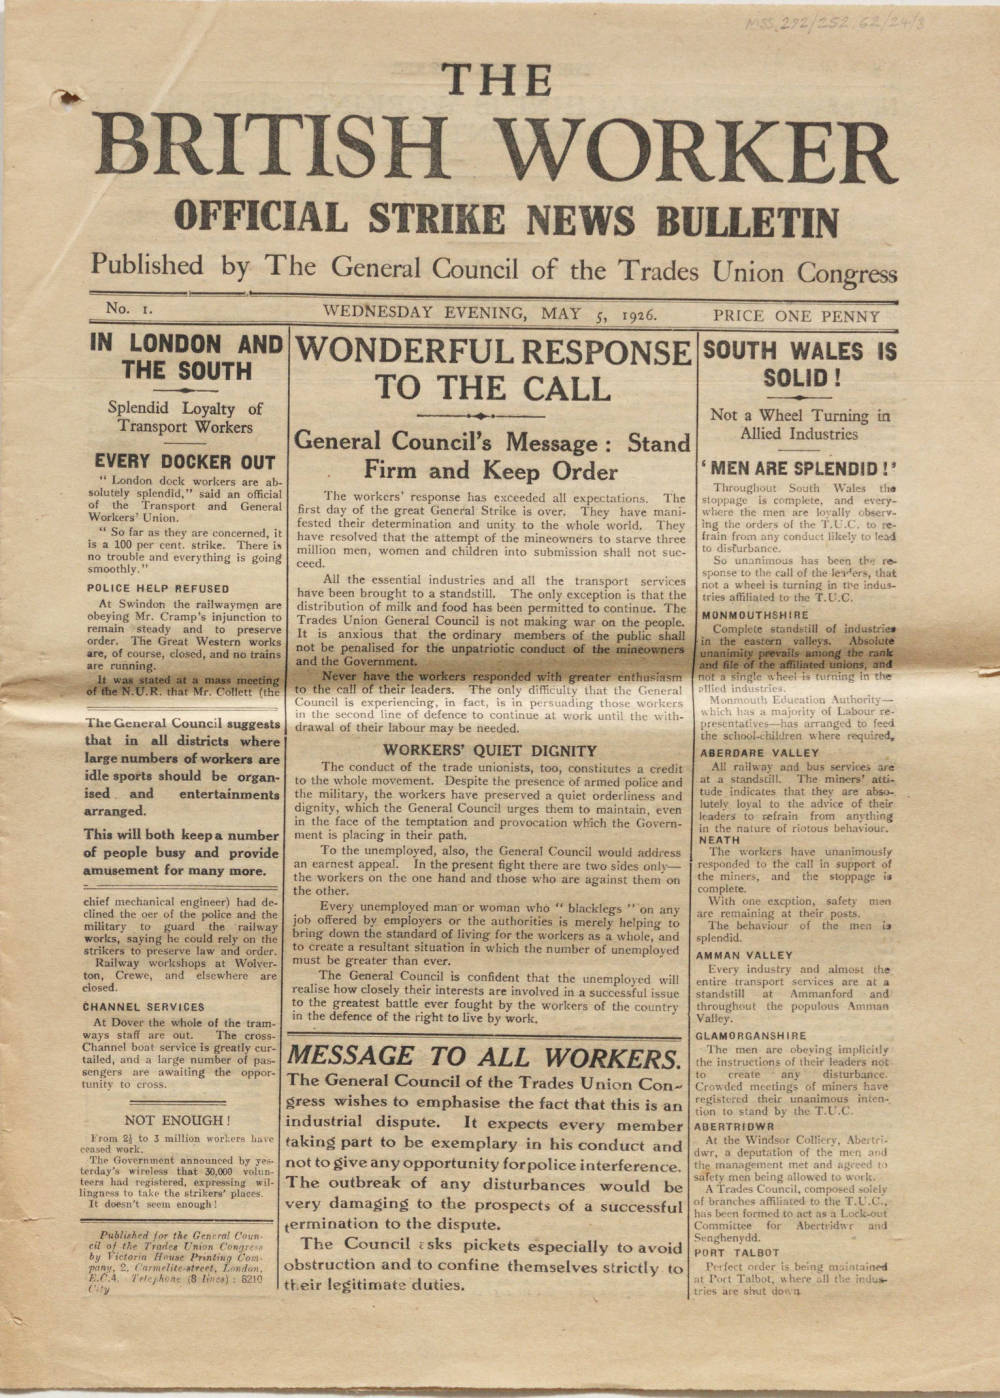 Front page of the first edition of The British Worker